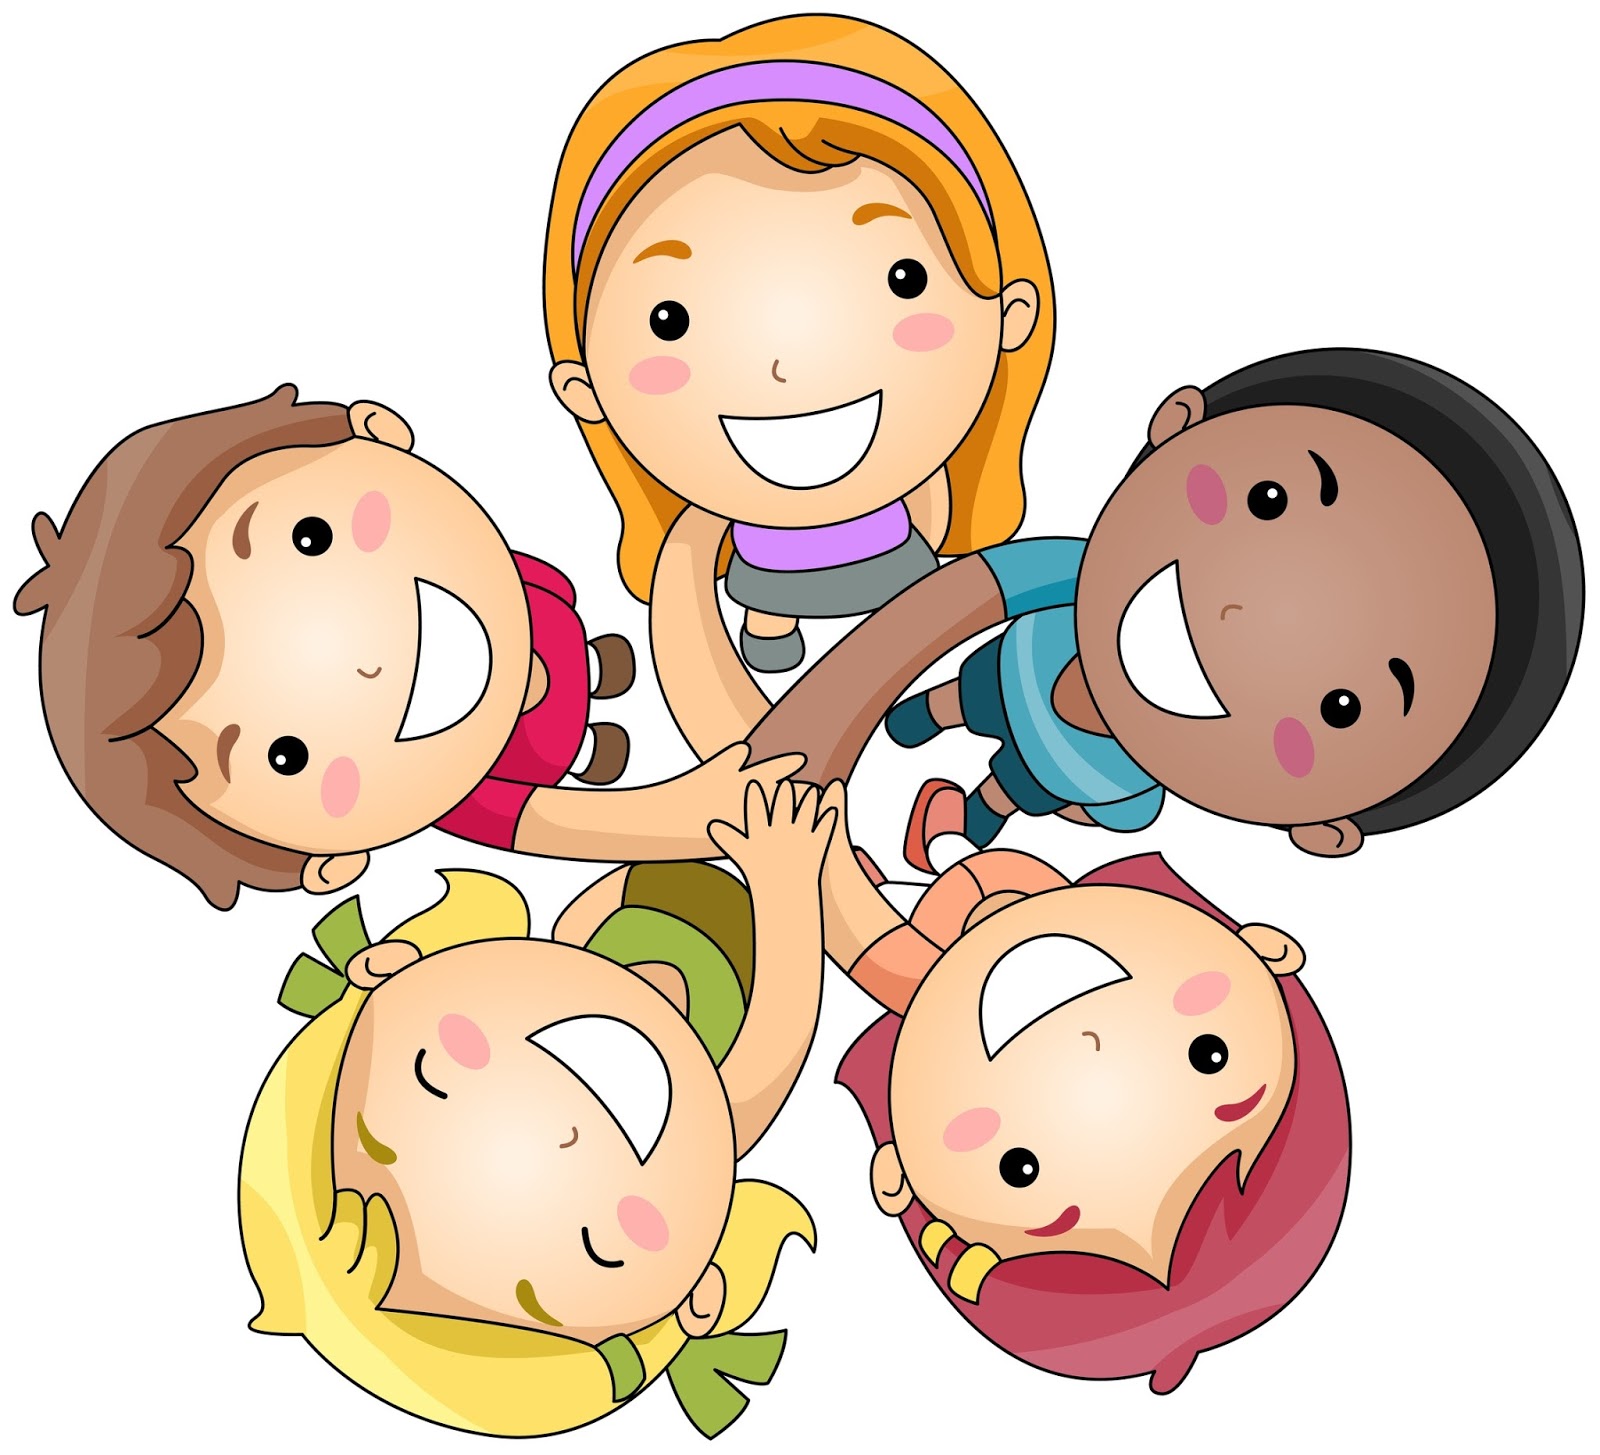 Girls Friendship Clipart - Free Clipart Images